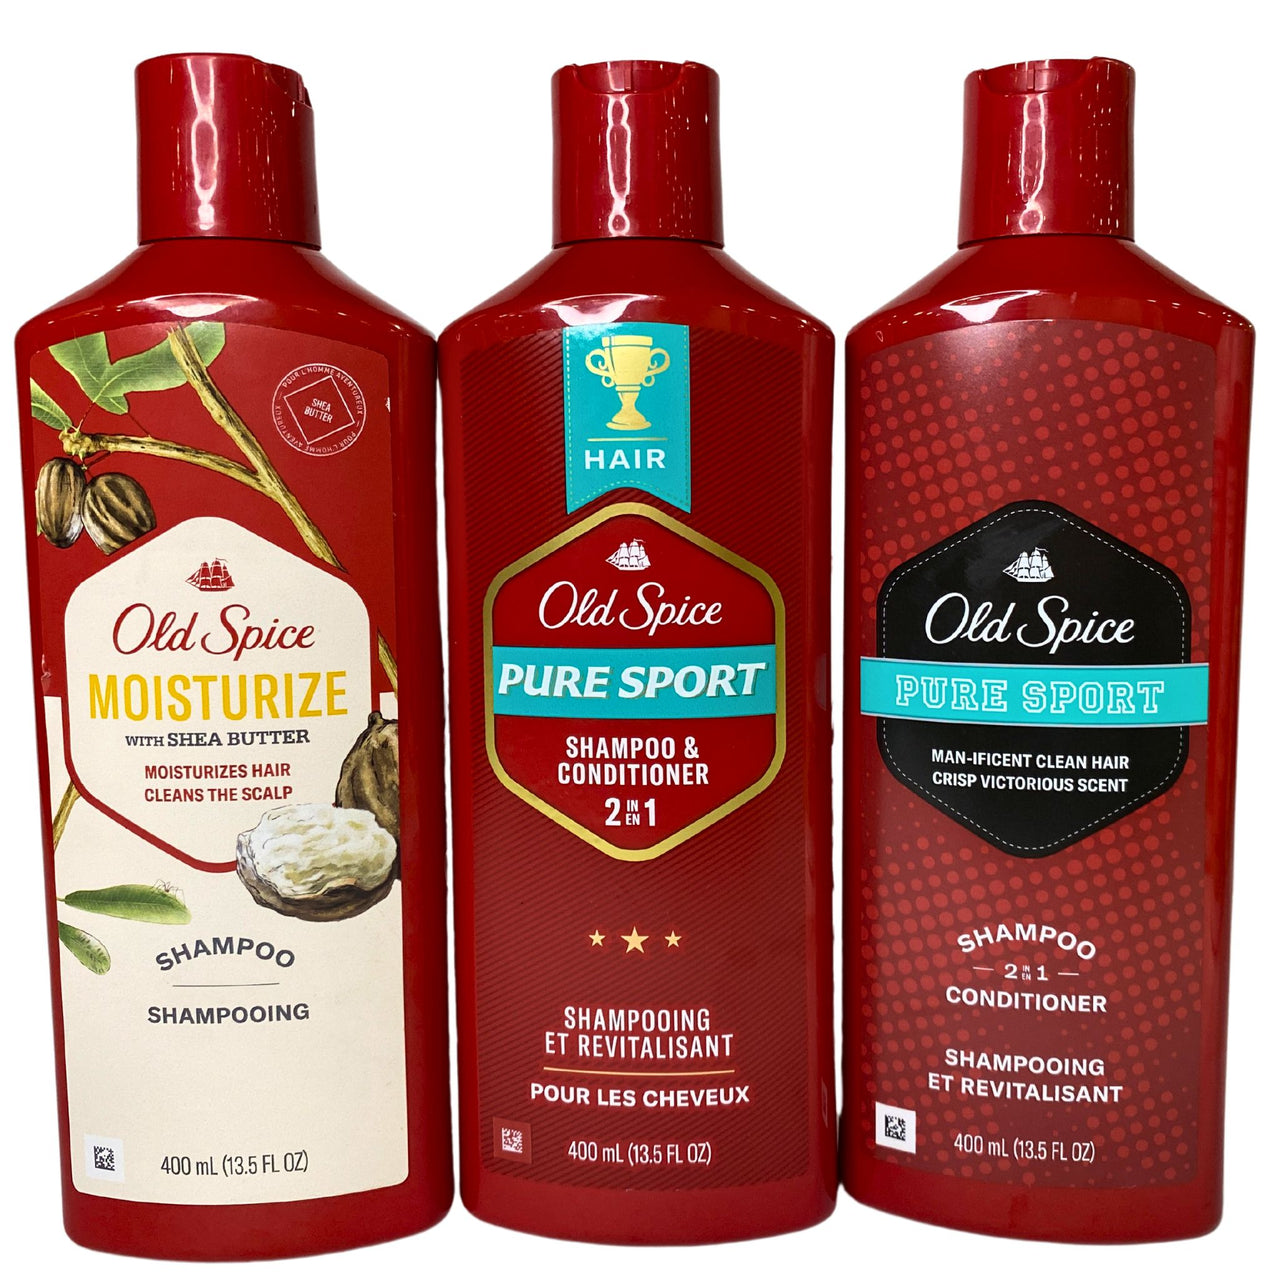 Old Spice Shampoo & 2IN1 Shampoo + Conditioner Assorted Mix 